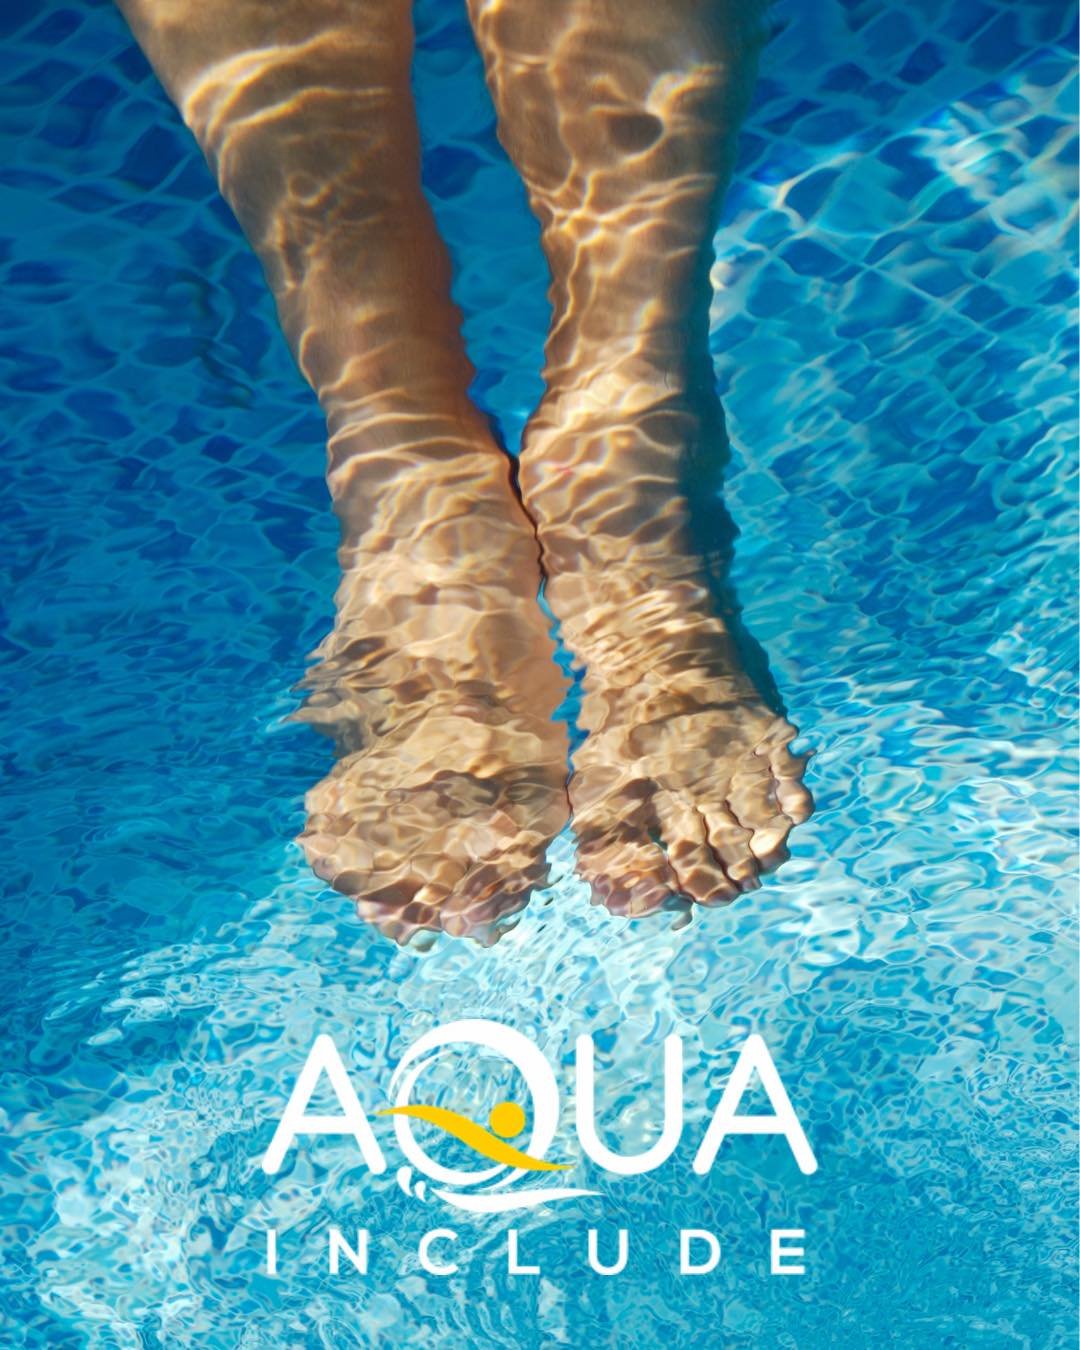 At Aqua Include we spend a lot of our time looking at and seeing feet! 🦶 😅😂 
Our feet enable us to move, to swim, to explore, to jump or move in a way that is right for us! This week is National Feet Week, and this is our shout out to feet! From t